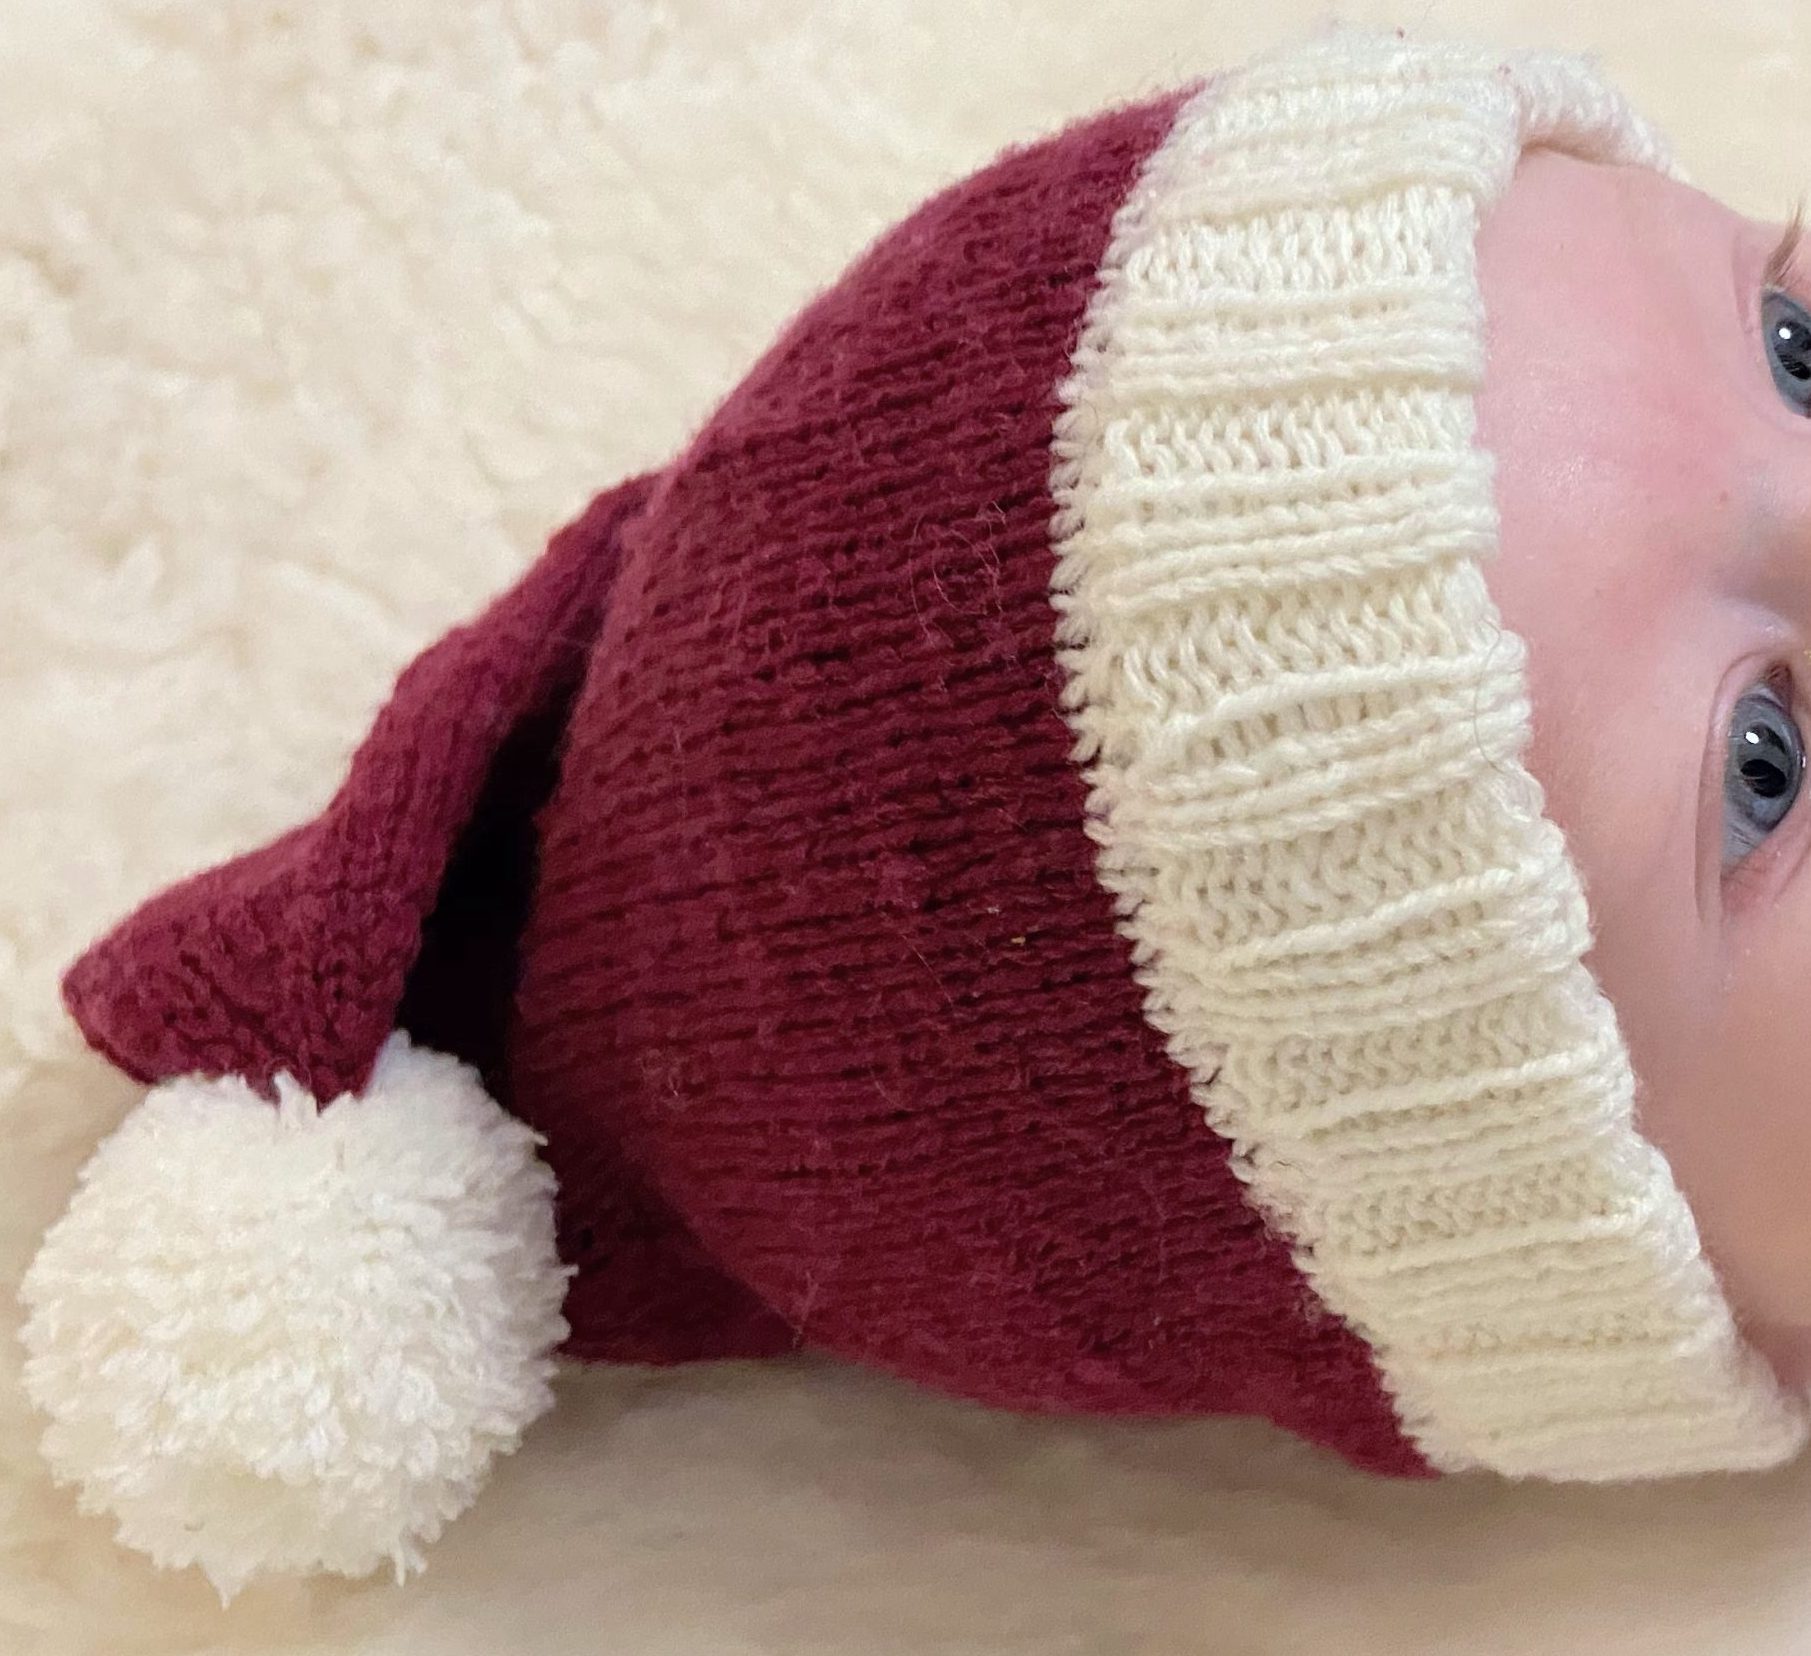 Knitted santa hat for a baby.